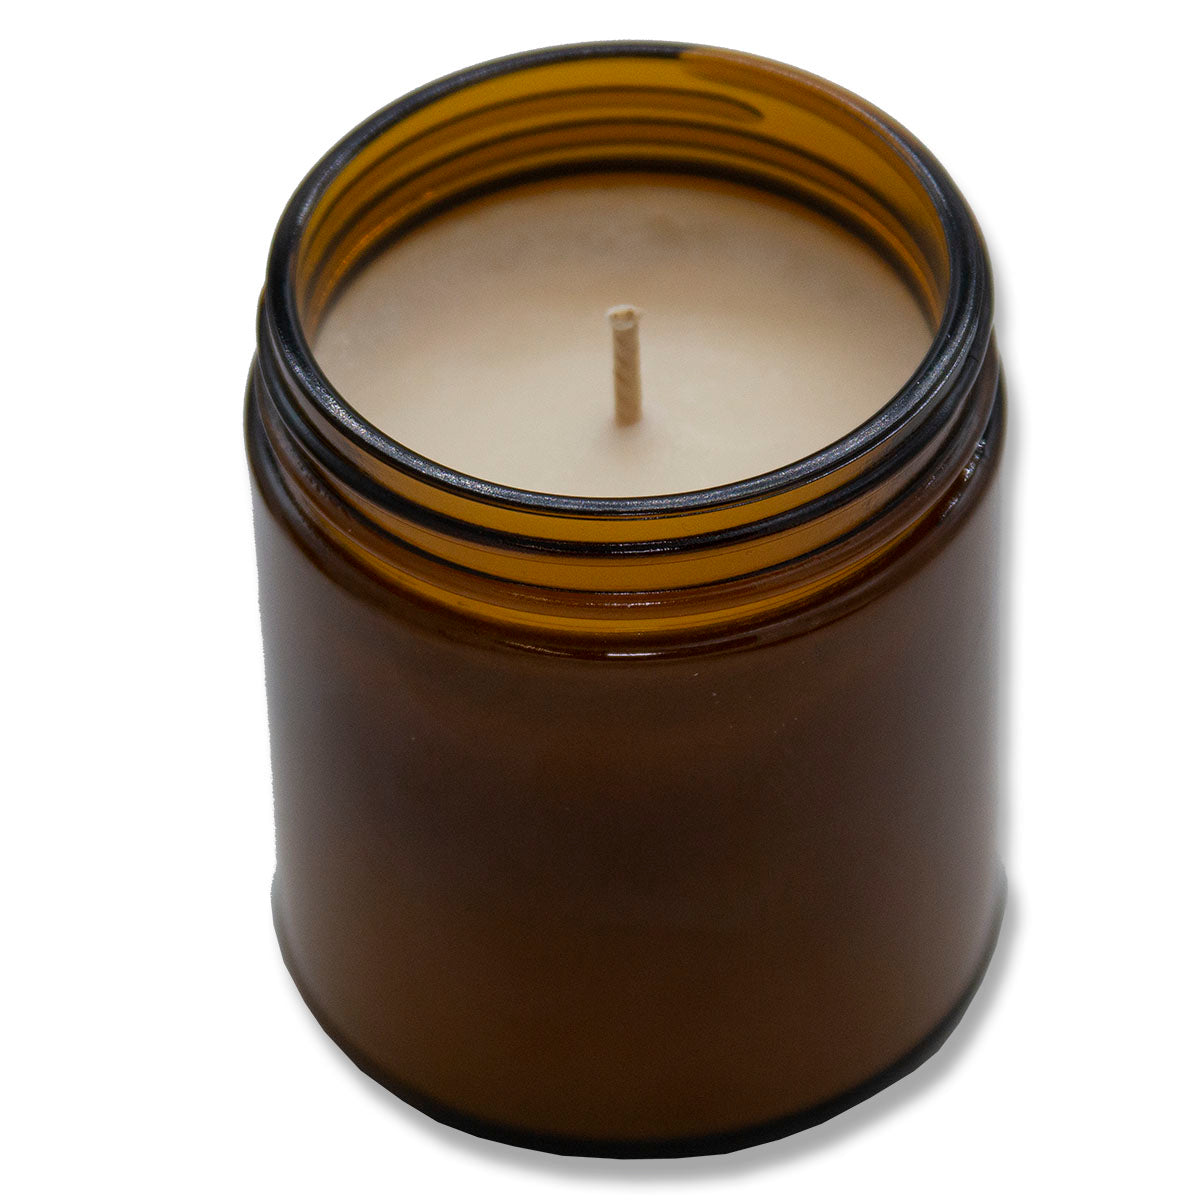 Summer Linen, Lone Star Candles & More's Premium Hand Poured Strongly Scented Soy Wax Gift Candle, A Breath of Fresh Air and Clean Linens, USA Made in Texas, Amber Glass Jar 9oz Best Mom